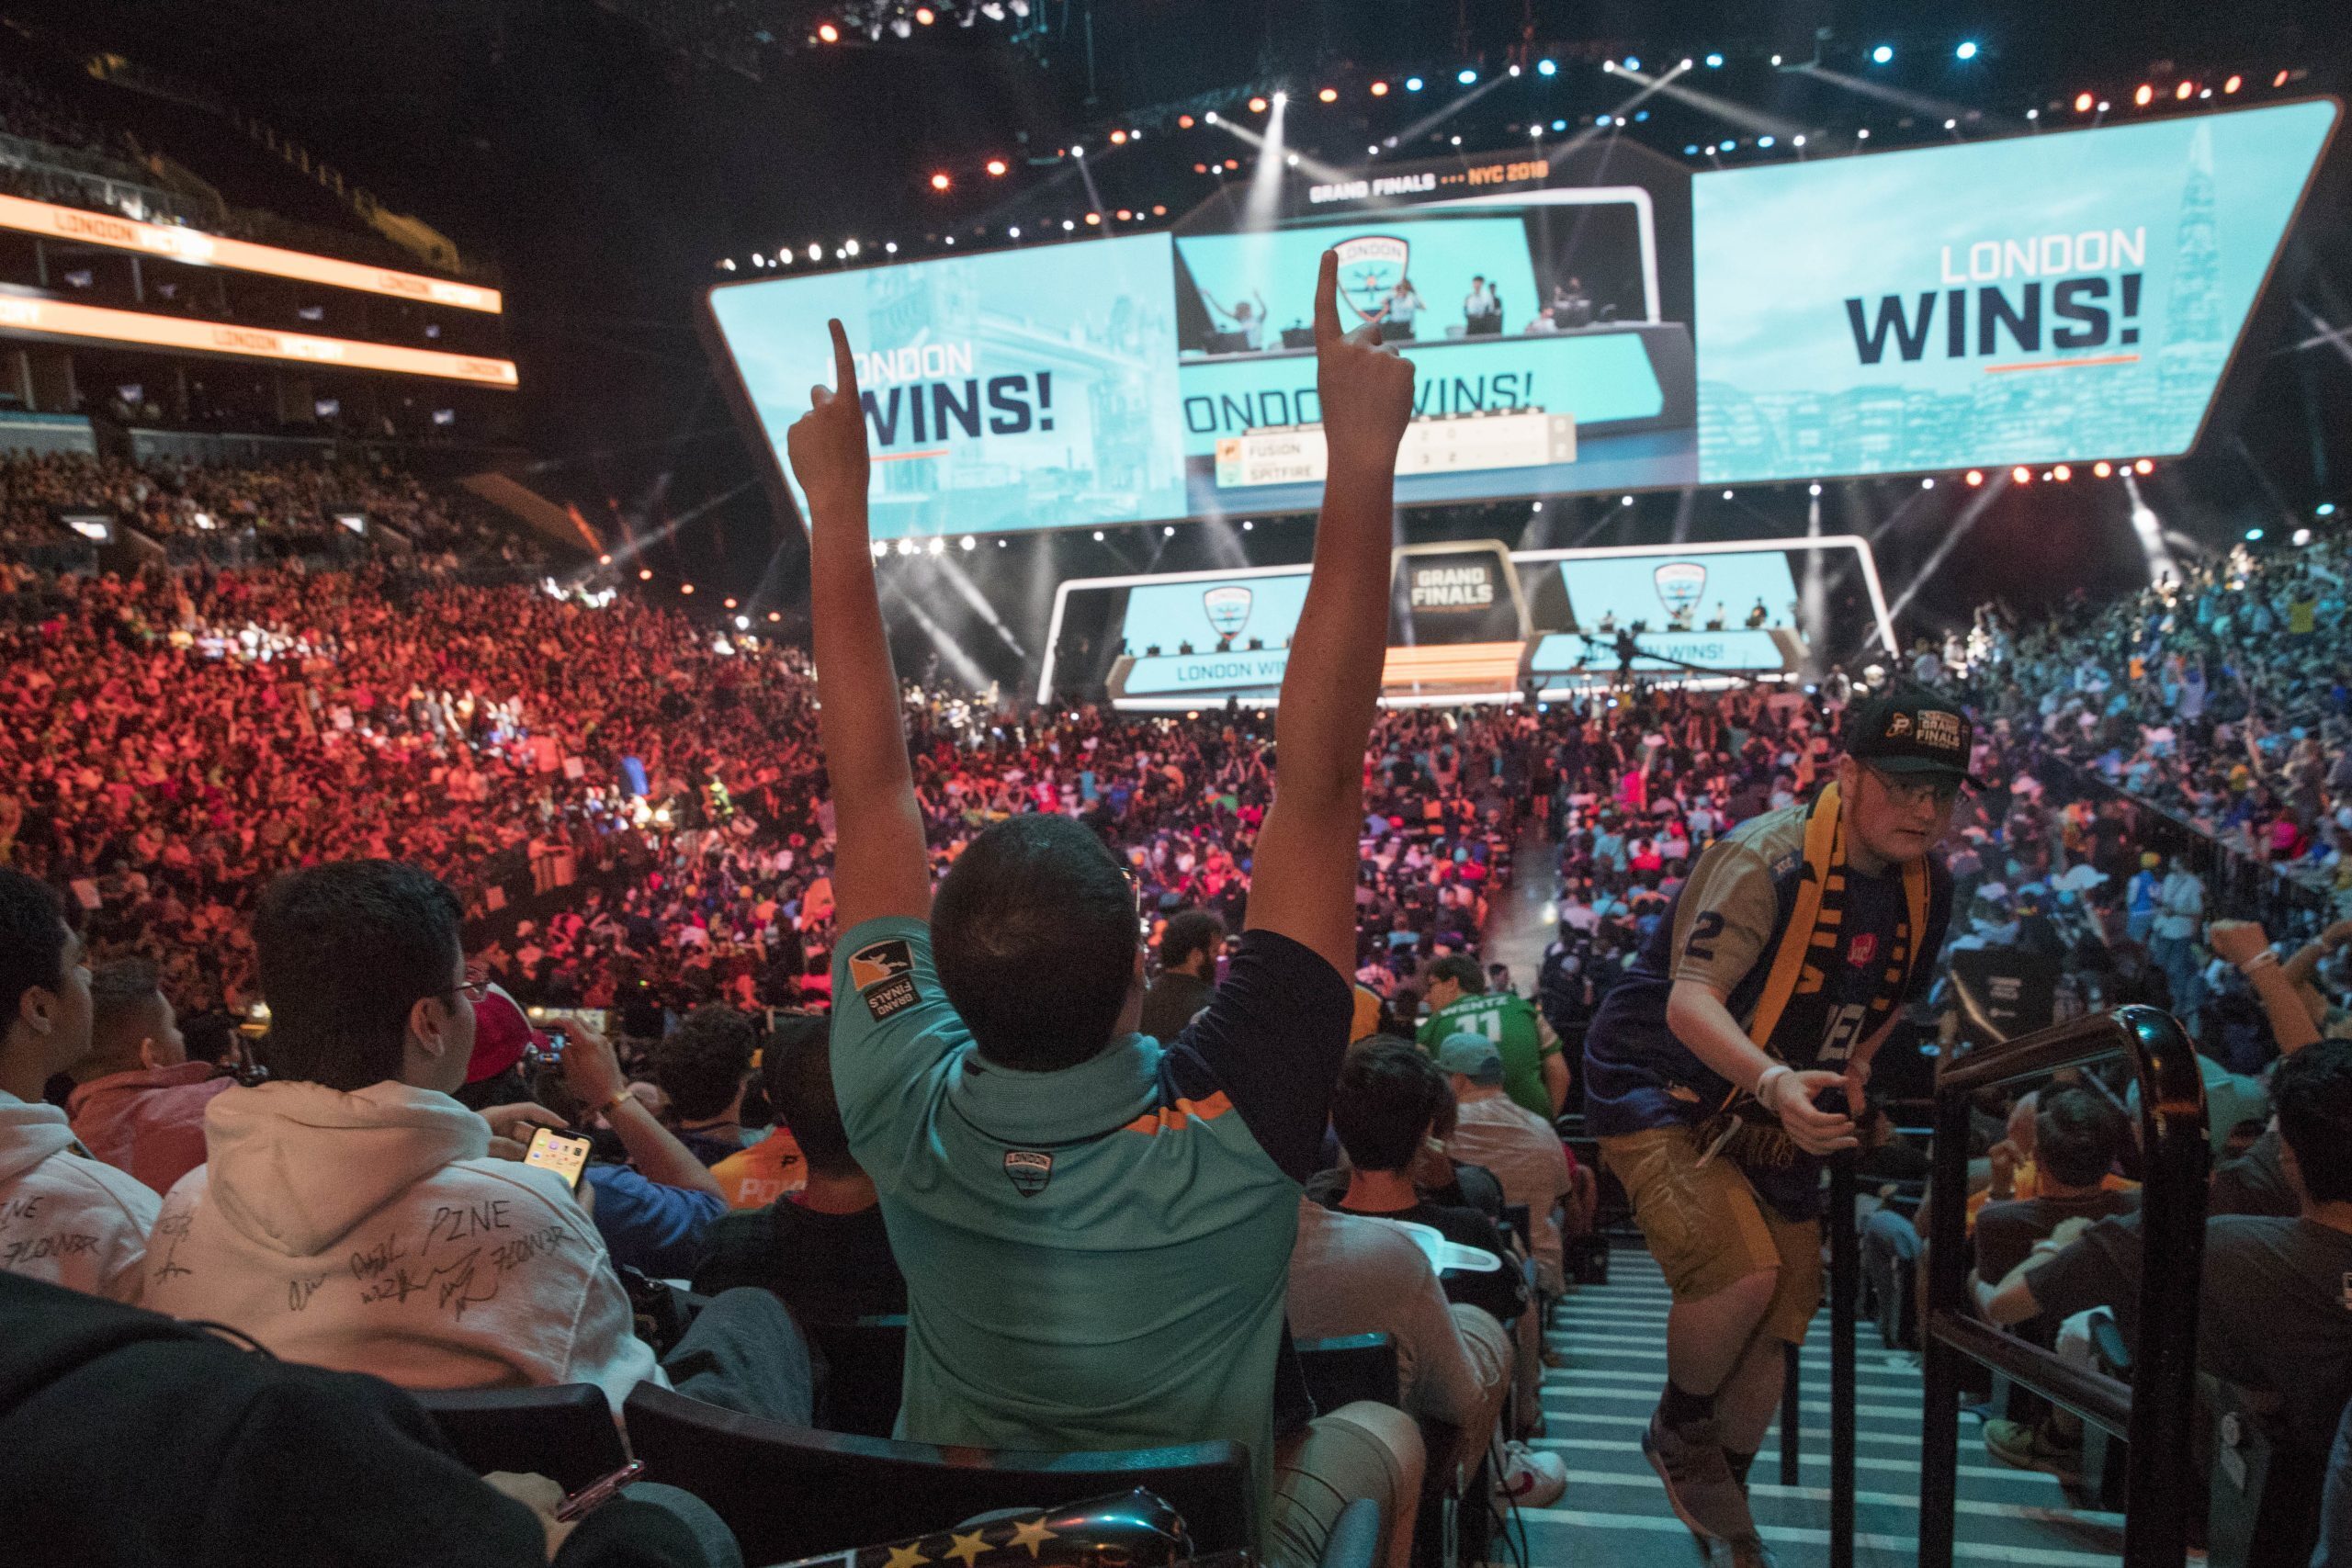 A London Spitfire fan reacts after London won during the Overwatch League Grand Finals competition. (Photo courtesy of AP Images)